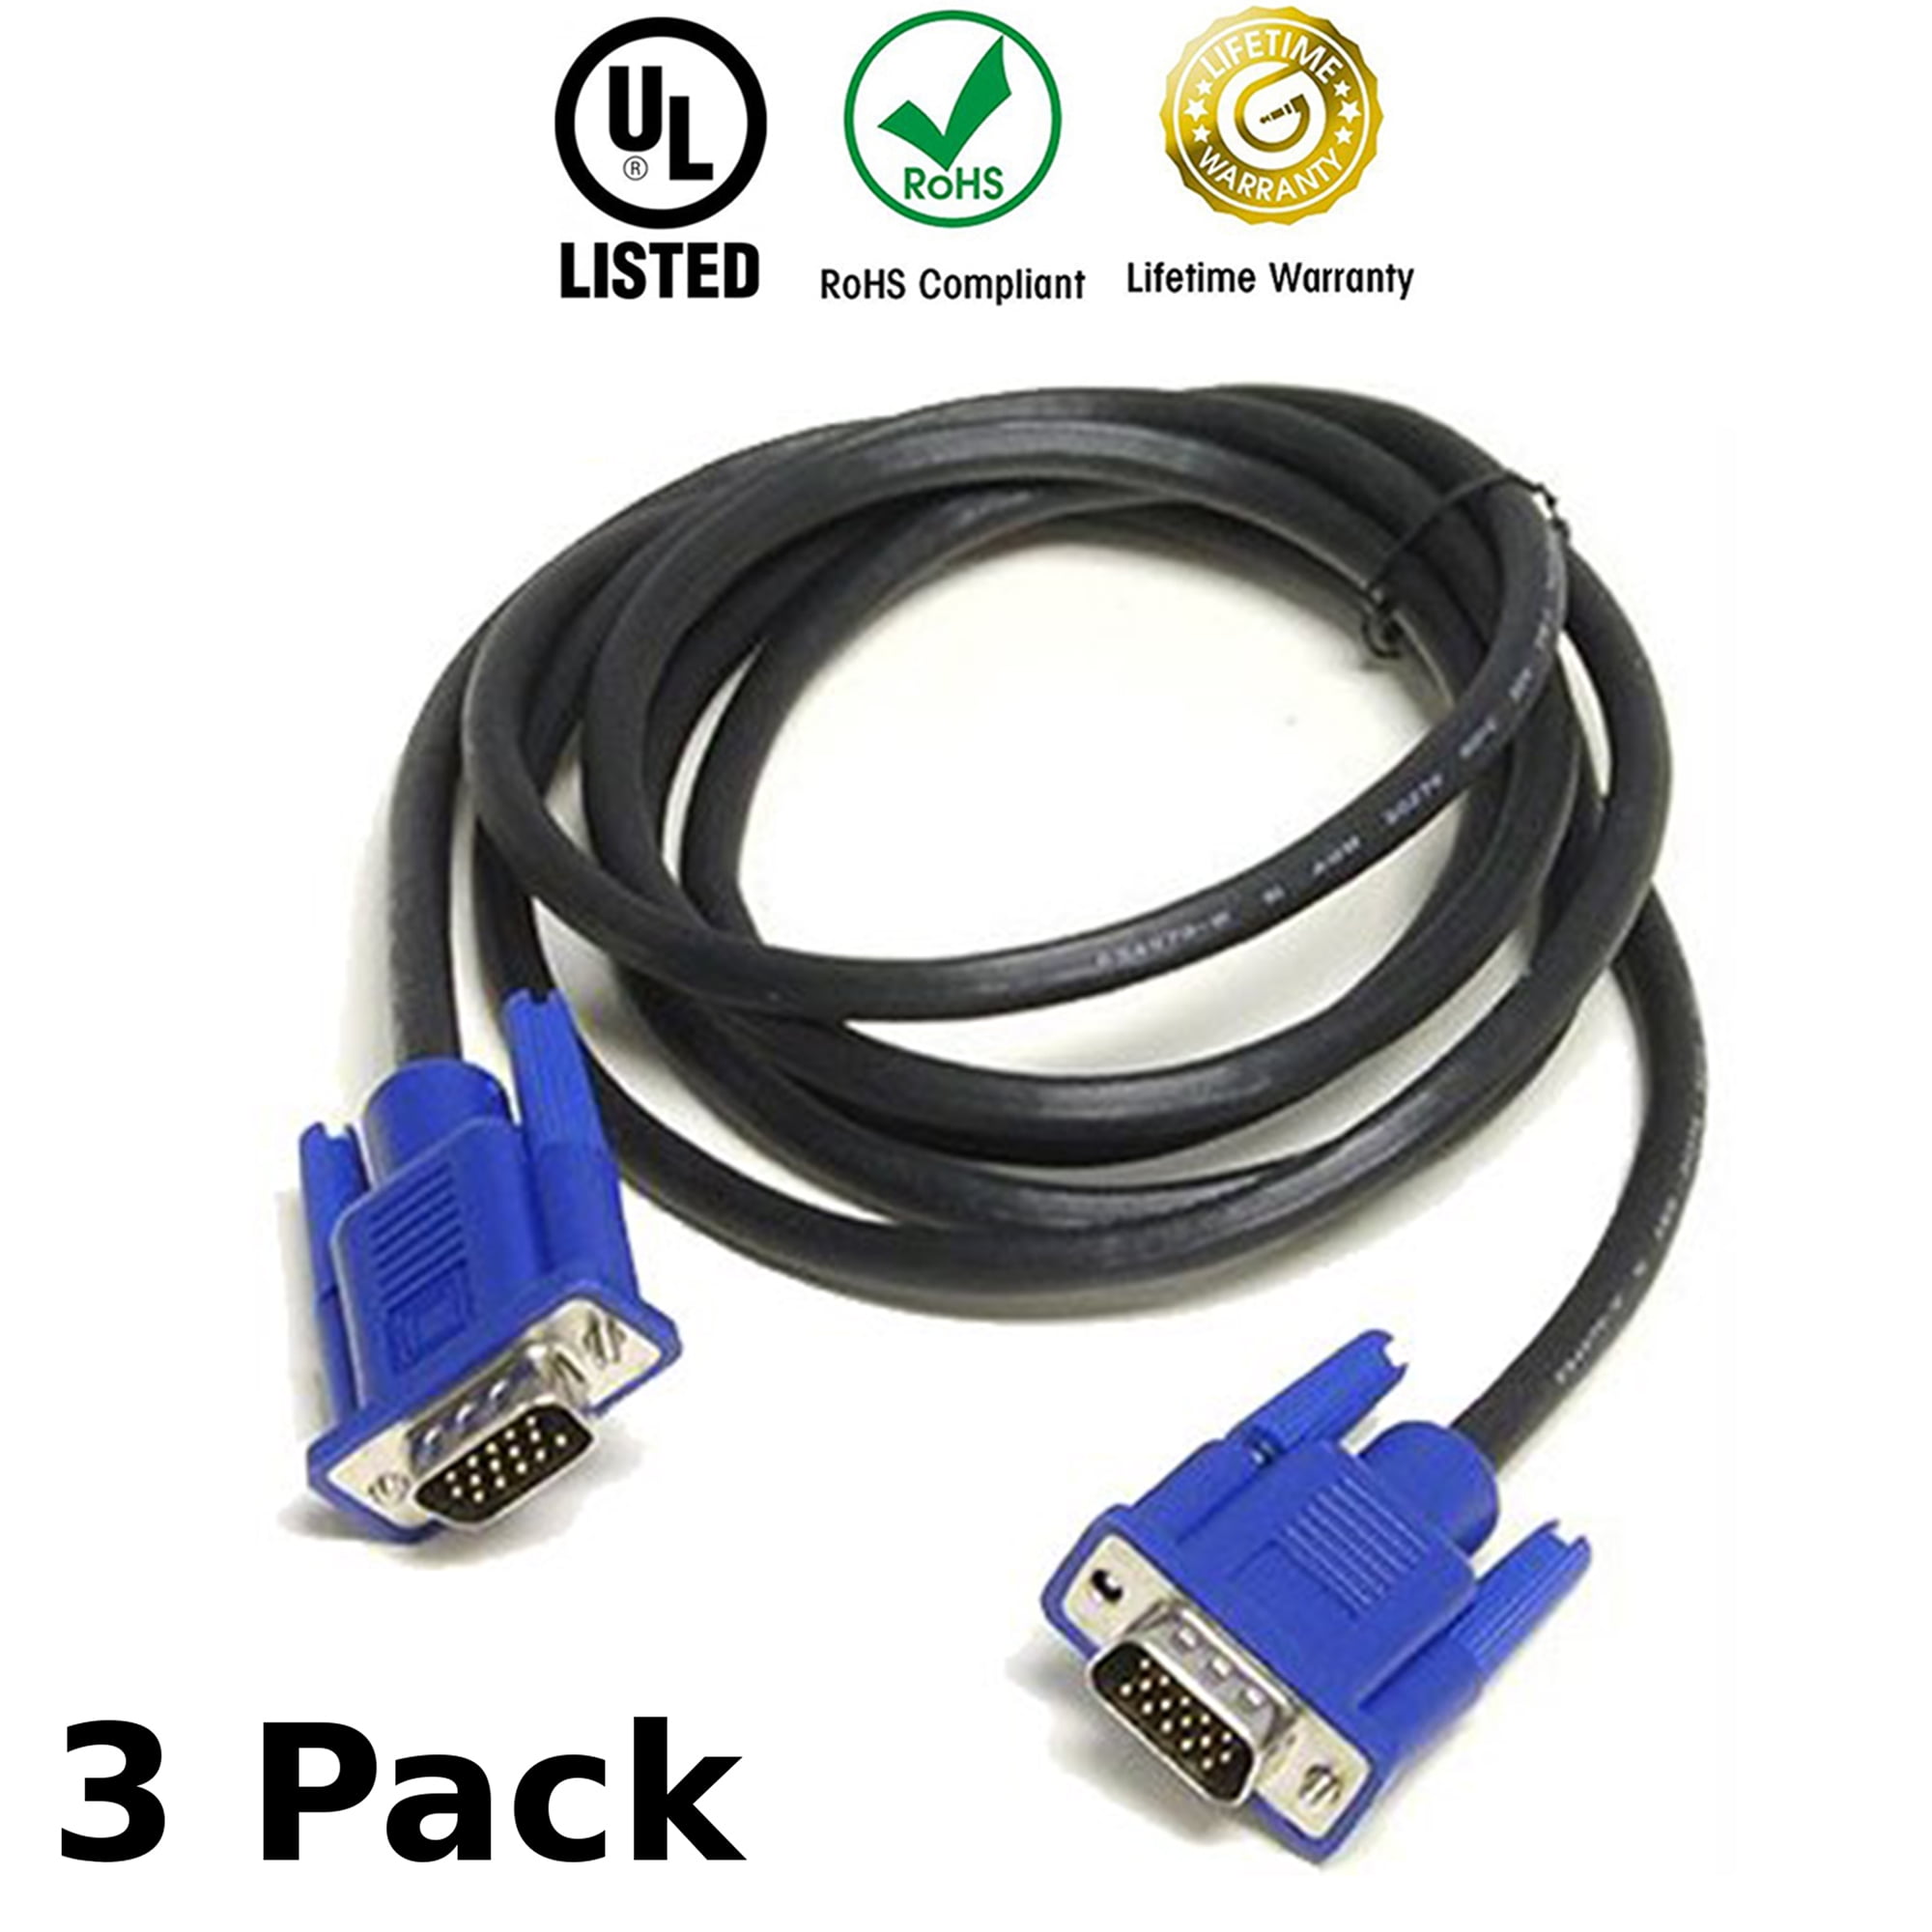 Cable Length: 0.2m Computer Cables Raspberry Pi 2 Model B/B Plus 1 to 2 VGA SVGA Cable Monitor Y Splitter Computer Cable Lead 15 Pin for PC Computer to-Better 